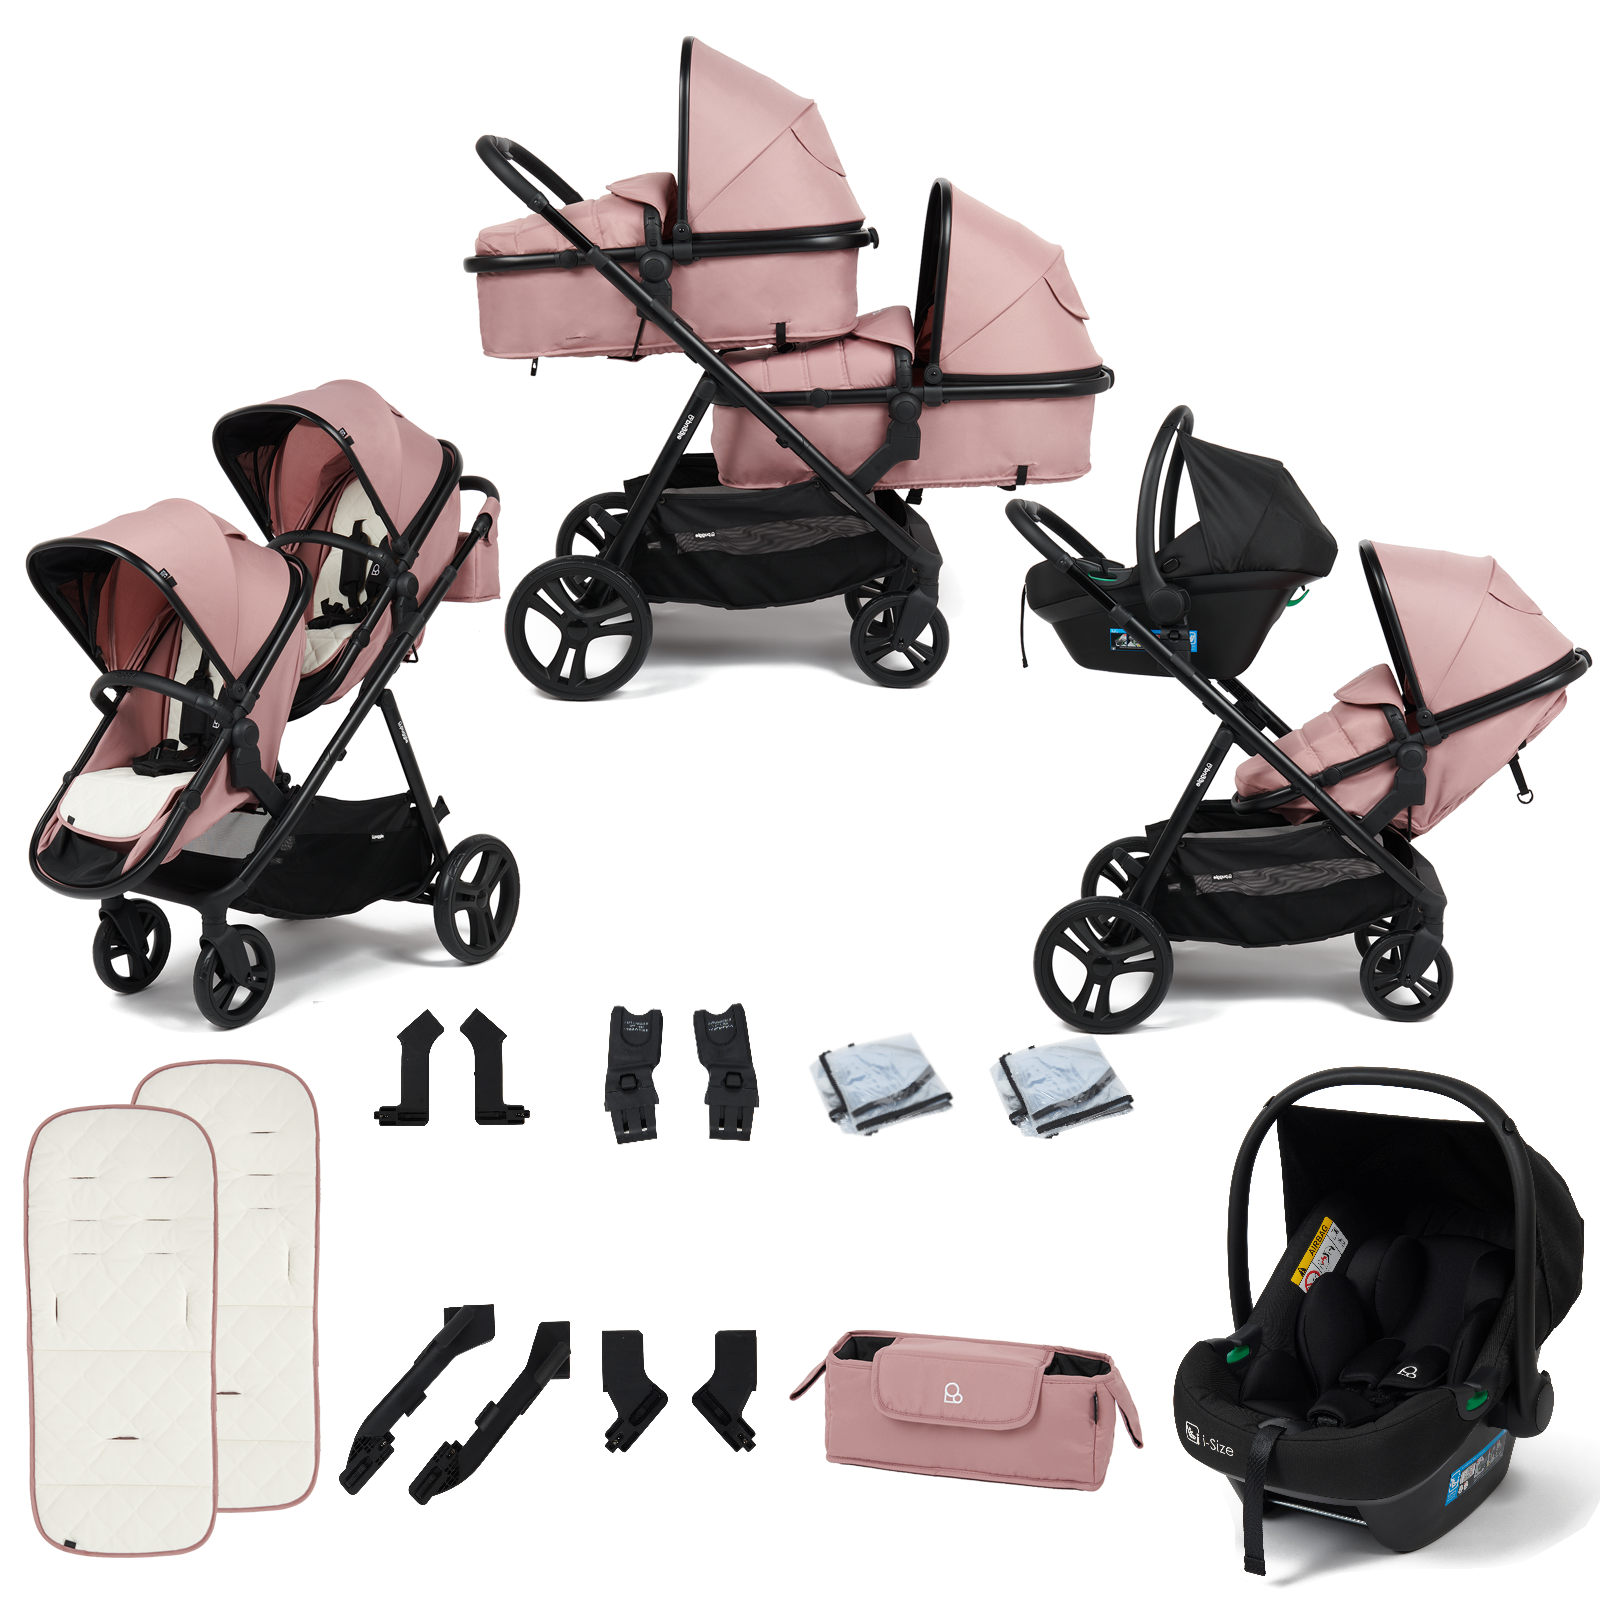 Puggle Memphis 2-in-1 Duo i-Size Double Travel System - Vintage Pink